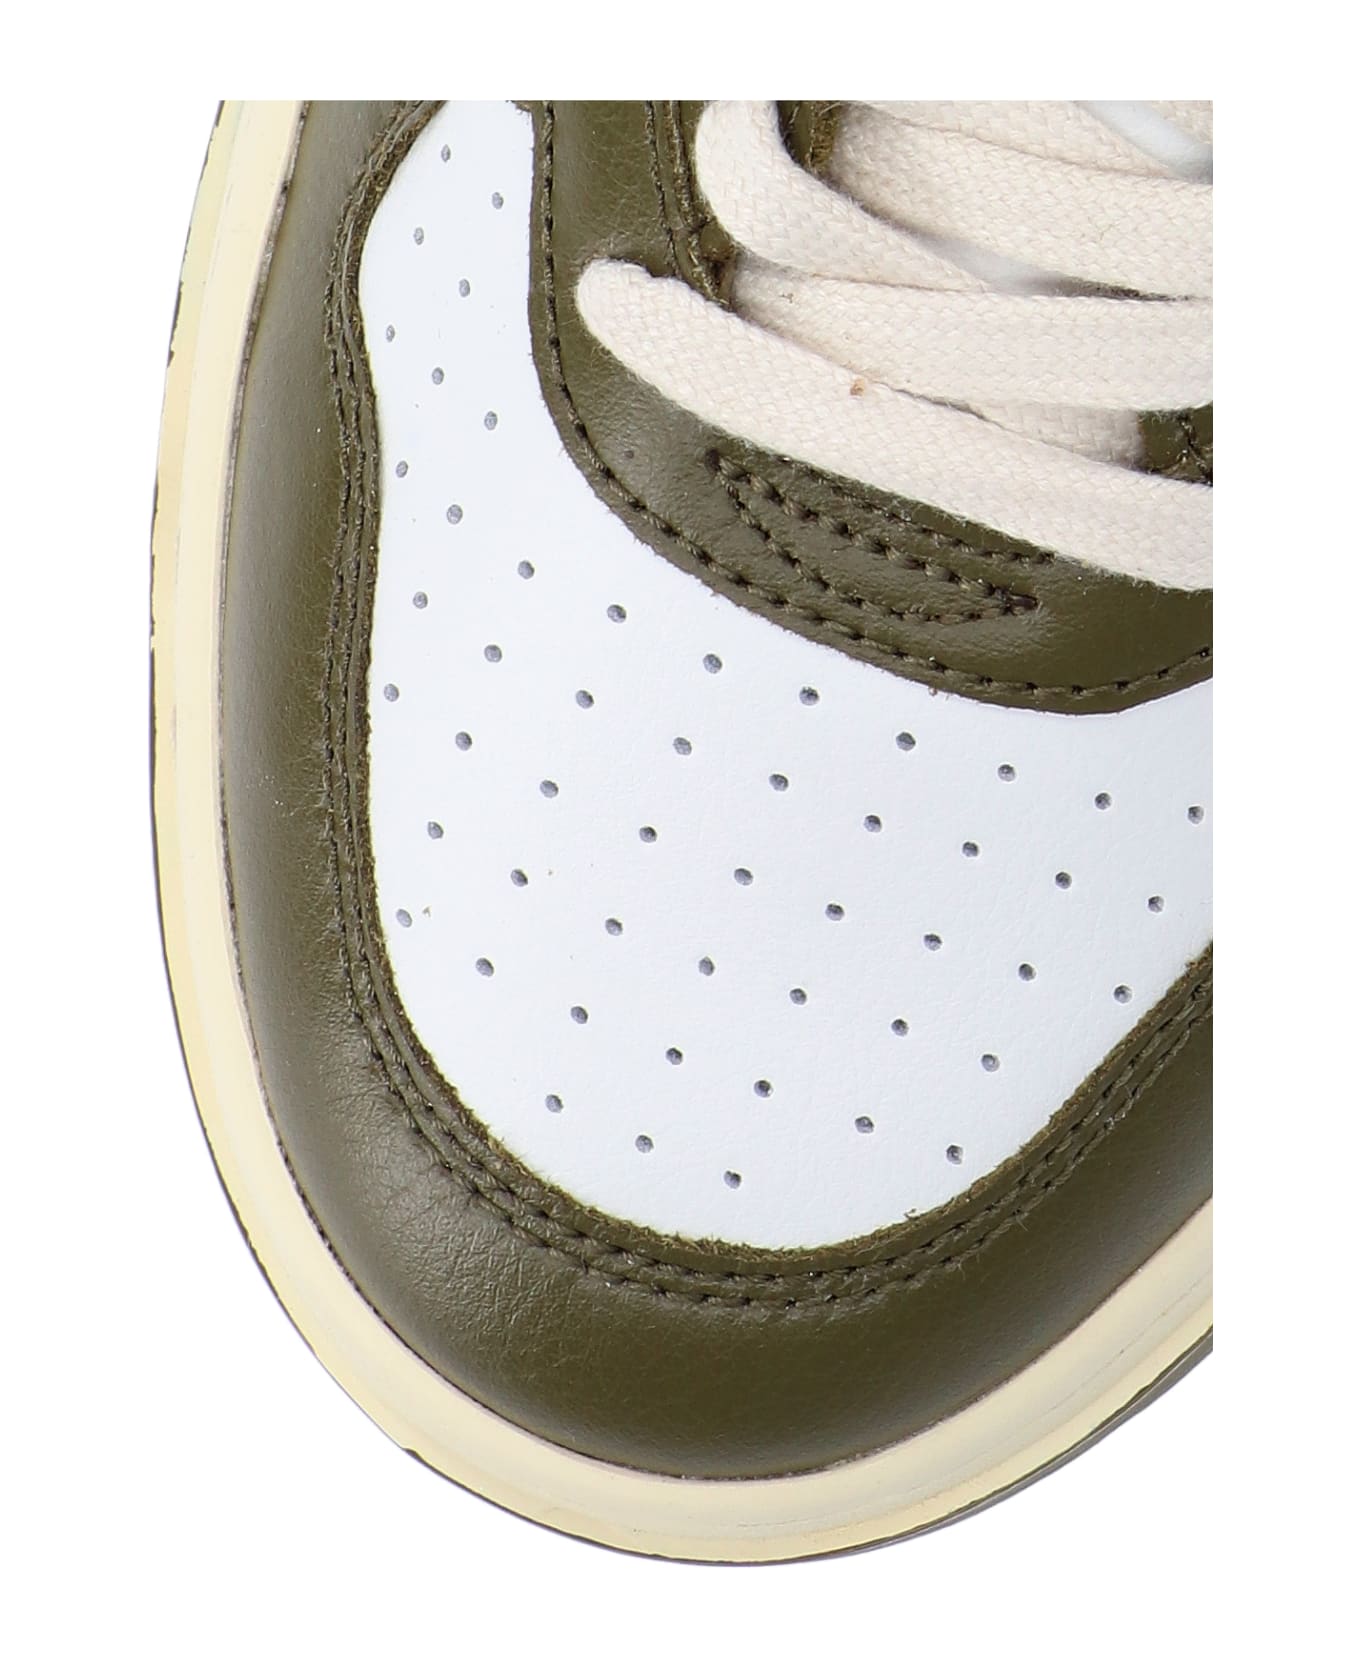 Autry Medalist Low Sneakers - Green スニーカー